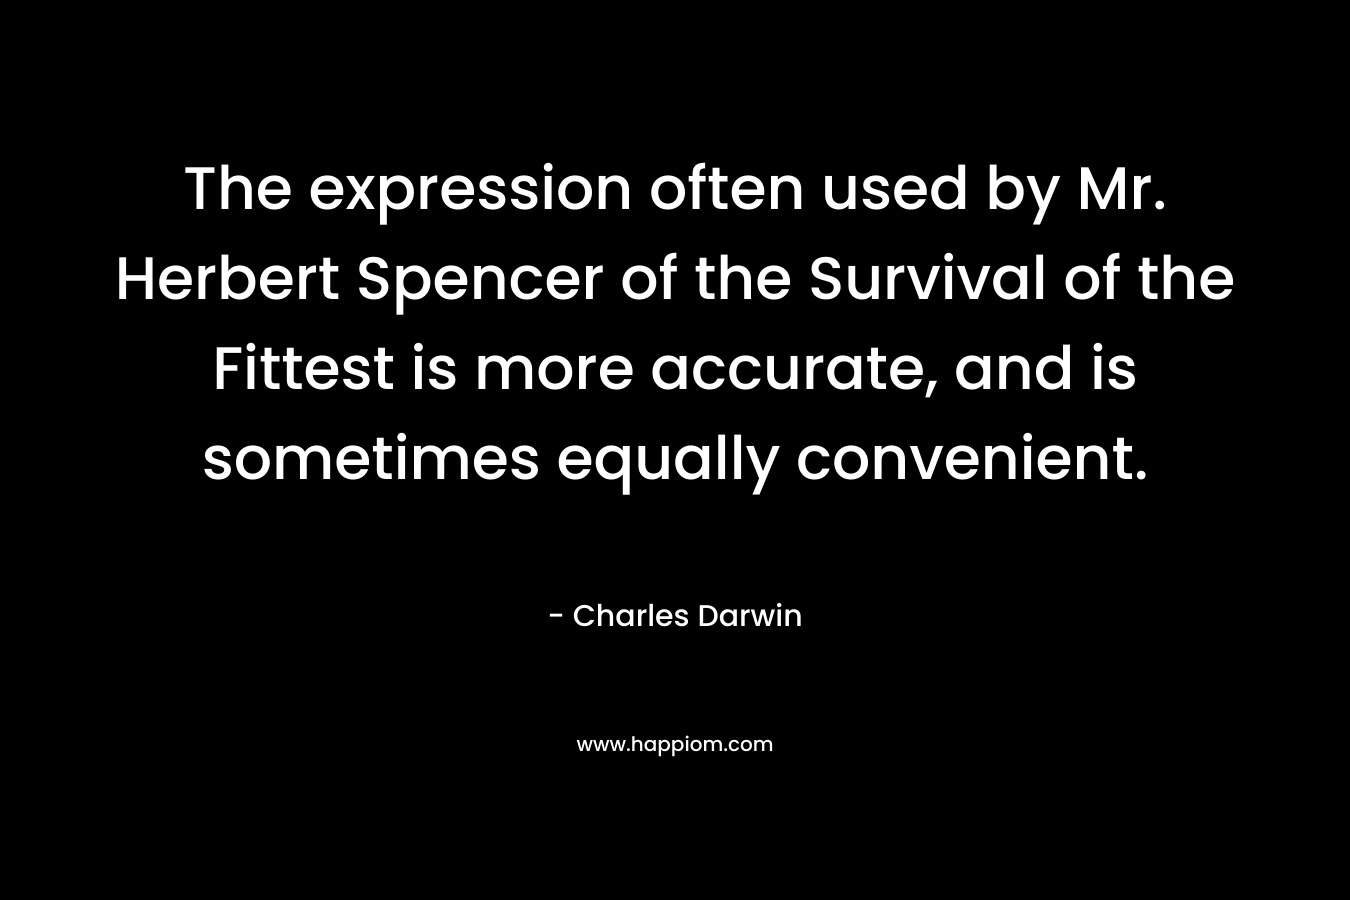 The expression often used by Mr. Herbert Spencer of the Survival of the Fittest is more accurate, and is sometimes equally convenient. – Charles Darwin